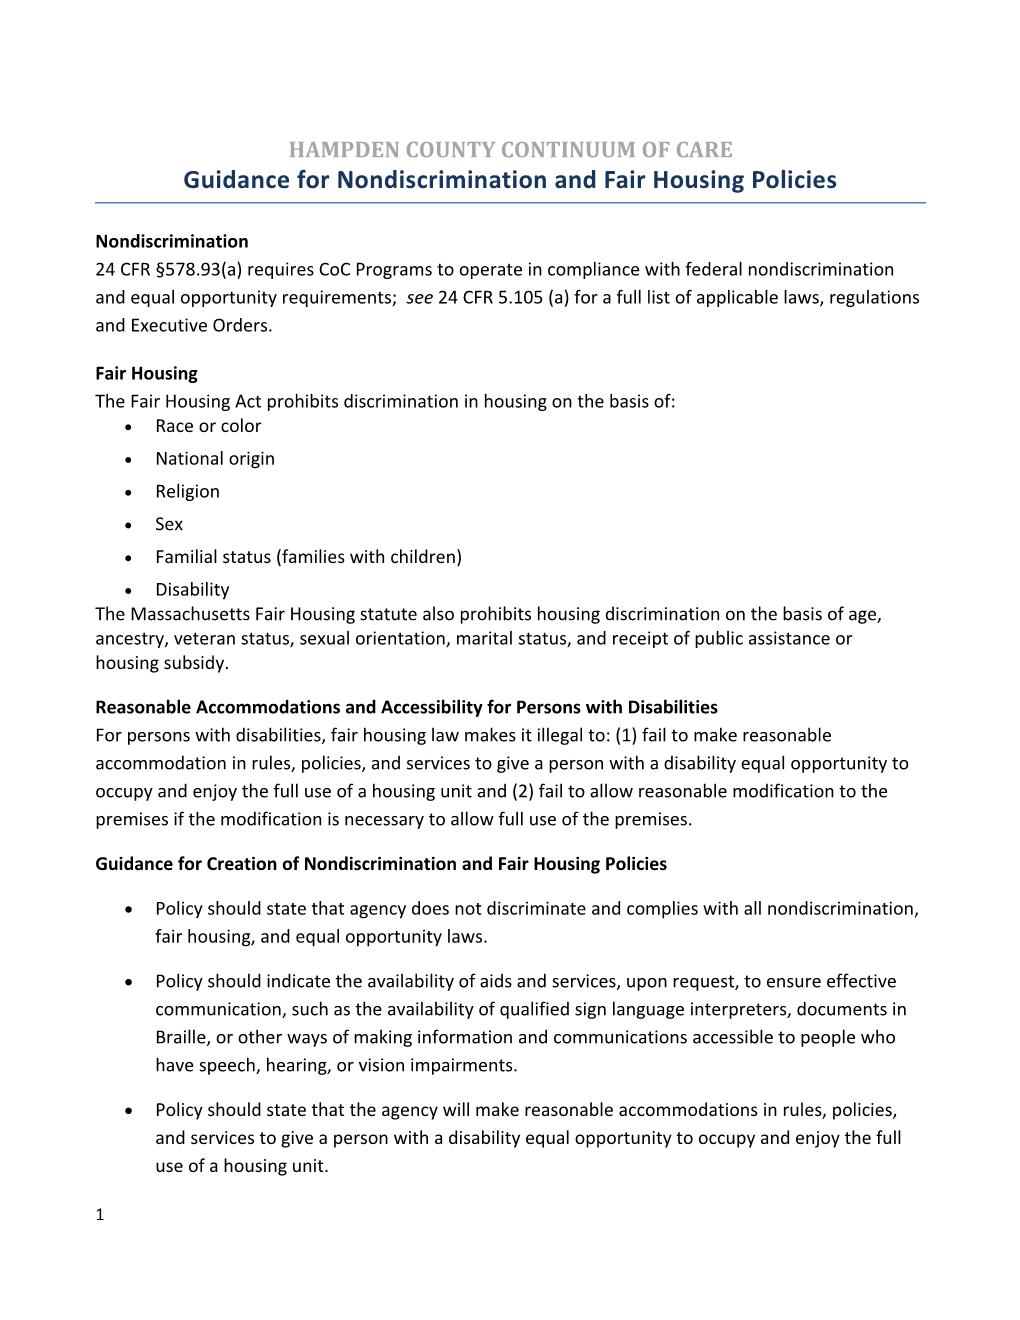 Guidance for Nondiscrimination and Fair Housing Policies